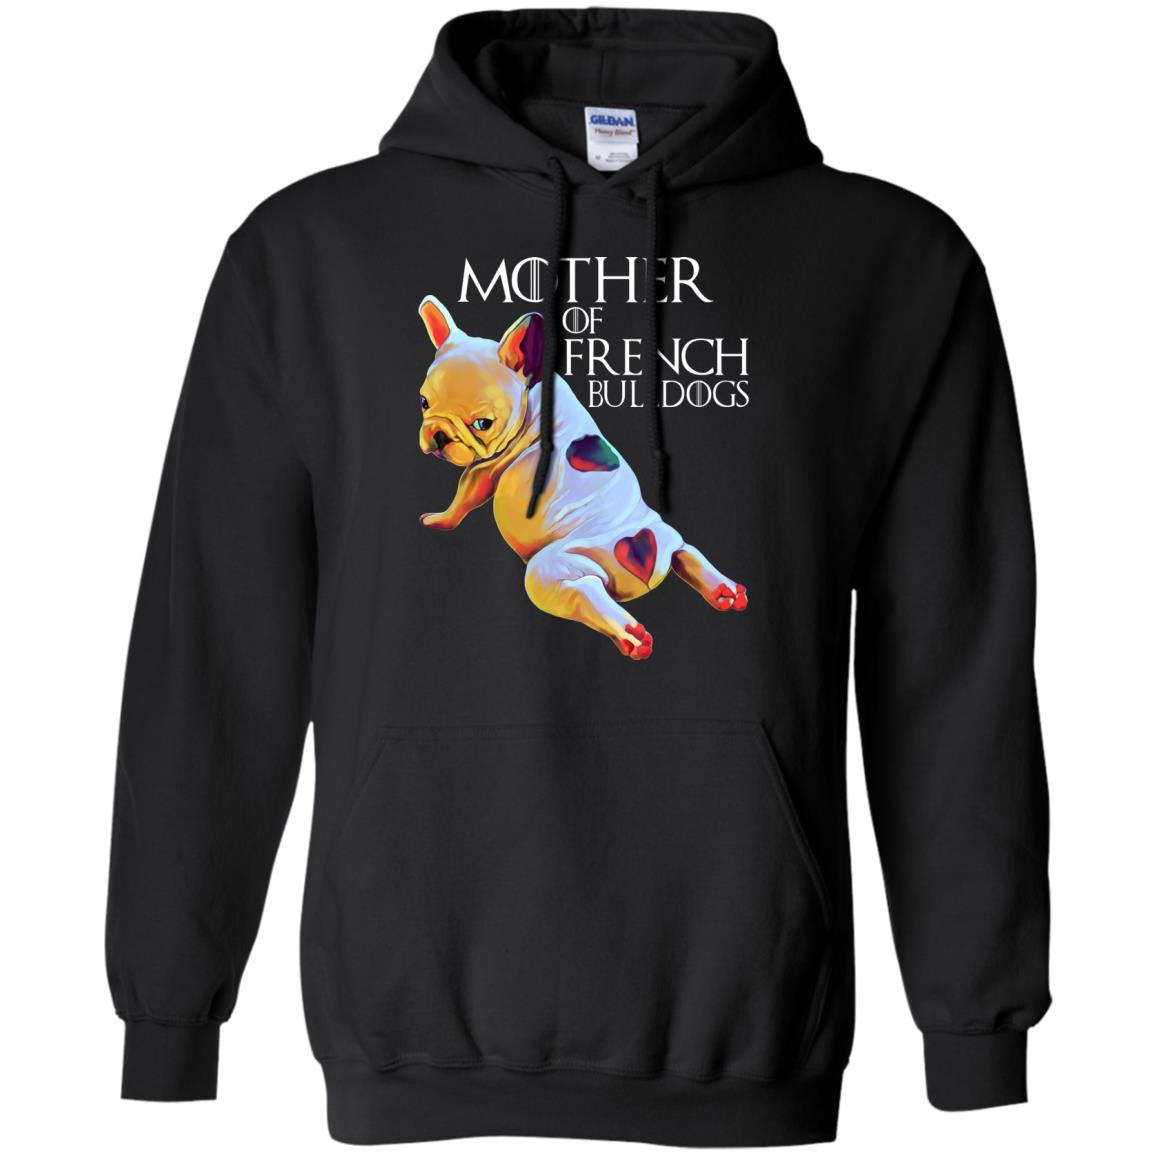 French Bulldog Hoodie for Women - Mother of French Bulldogs - GoneBold.gift